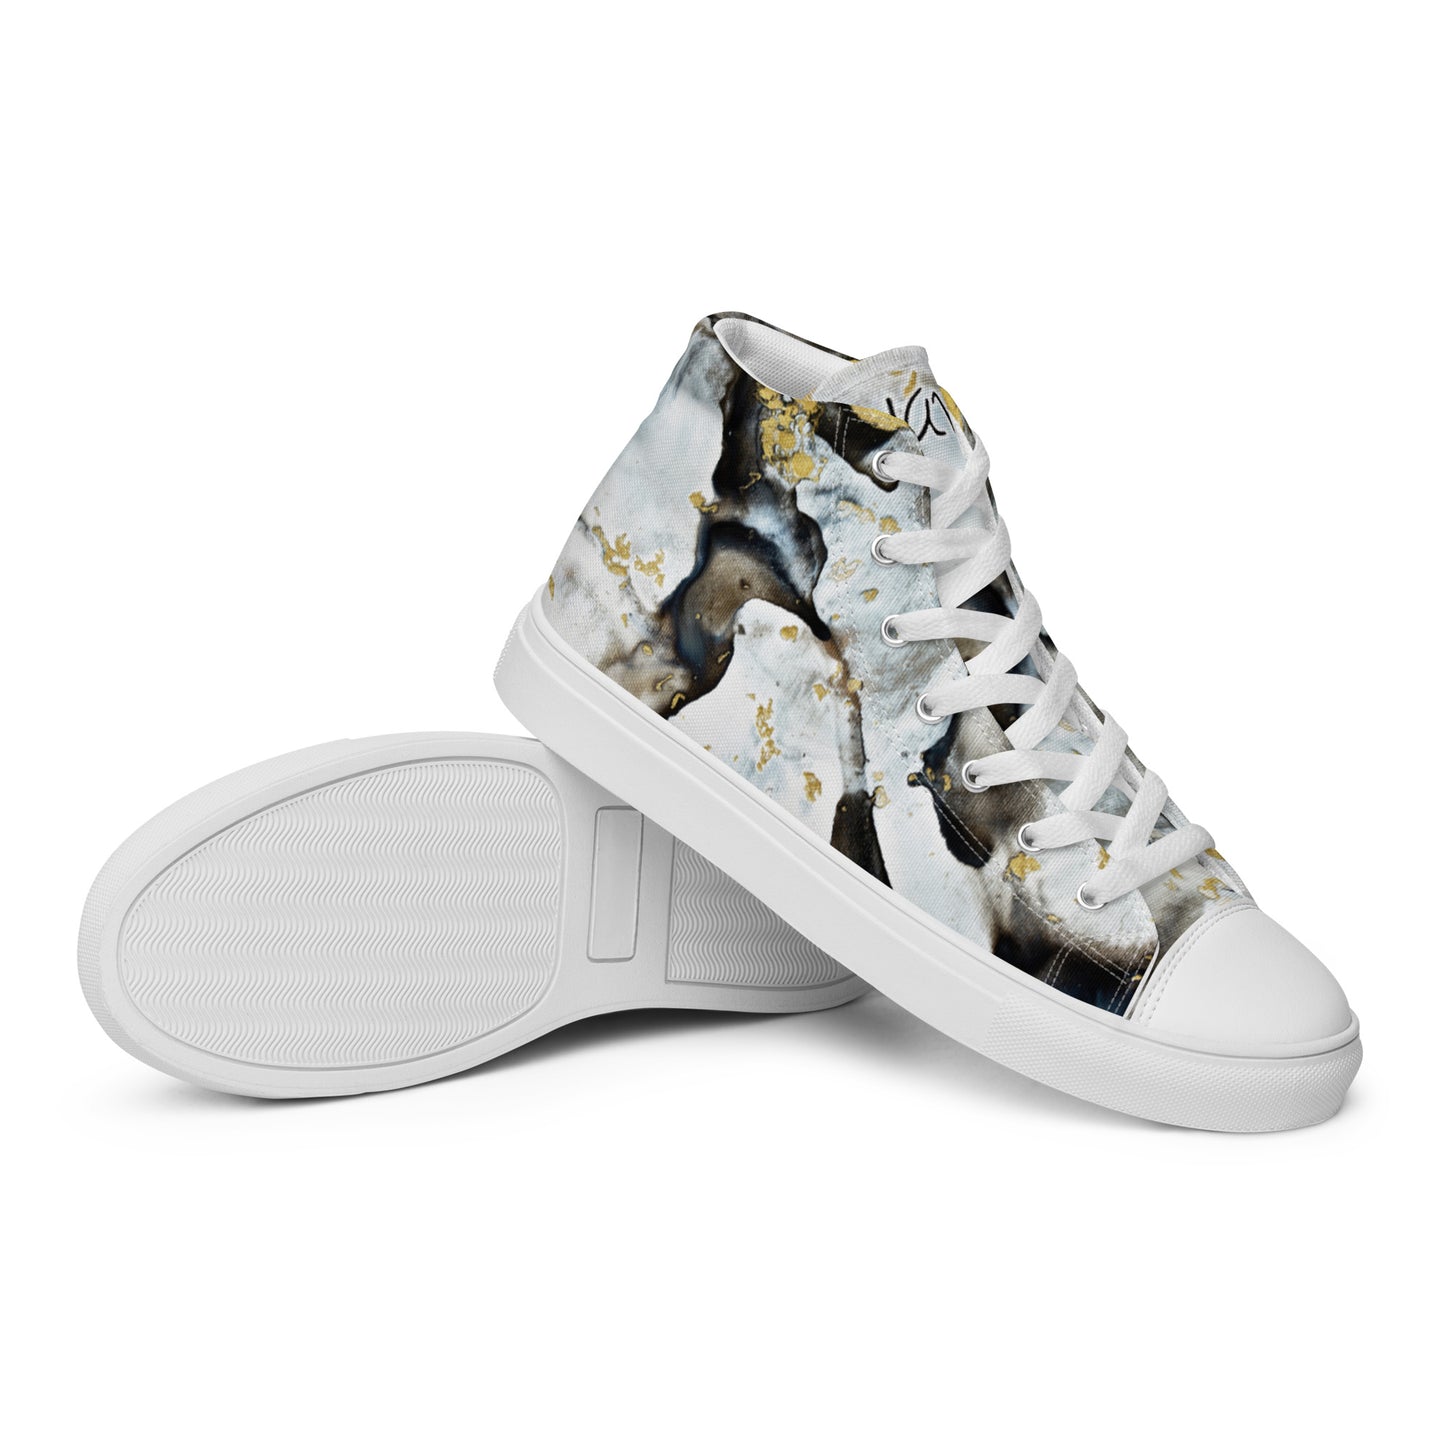 Women’s high top canvas shoes - Black and white design